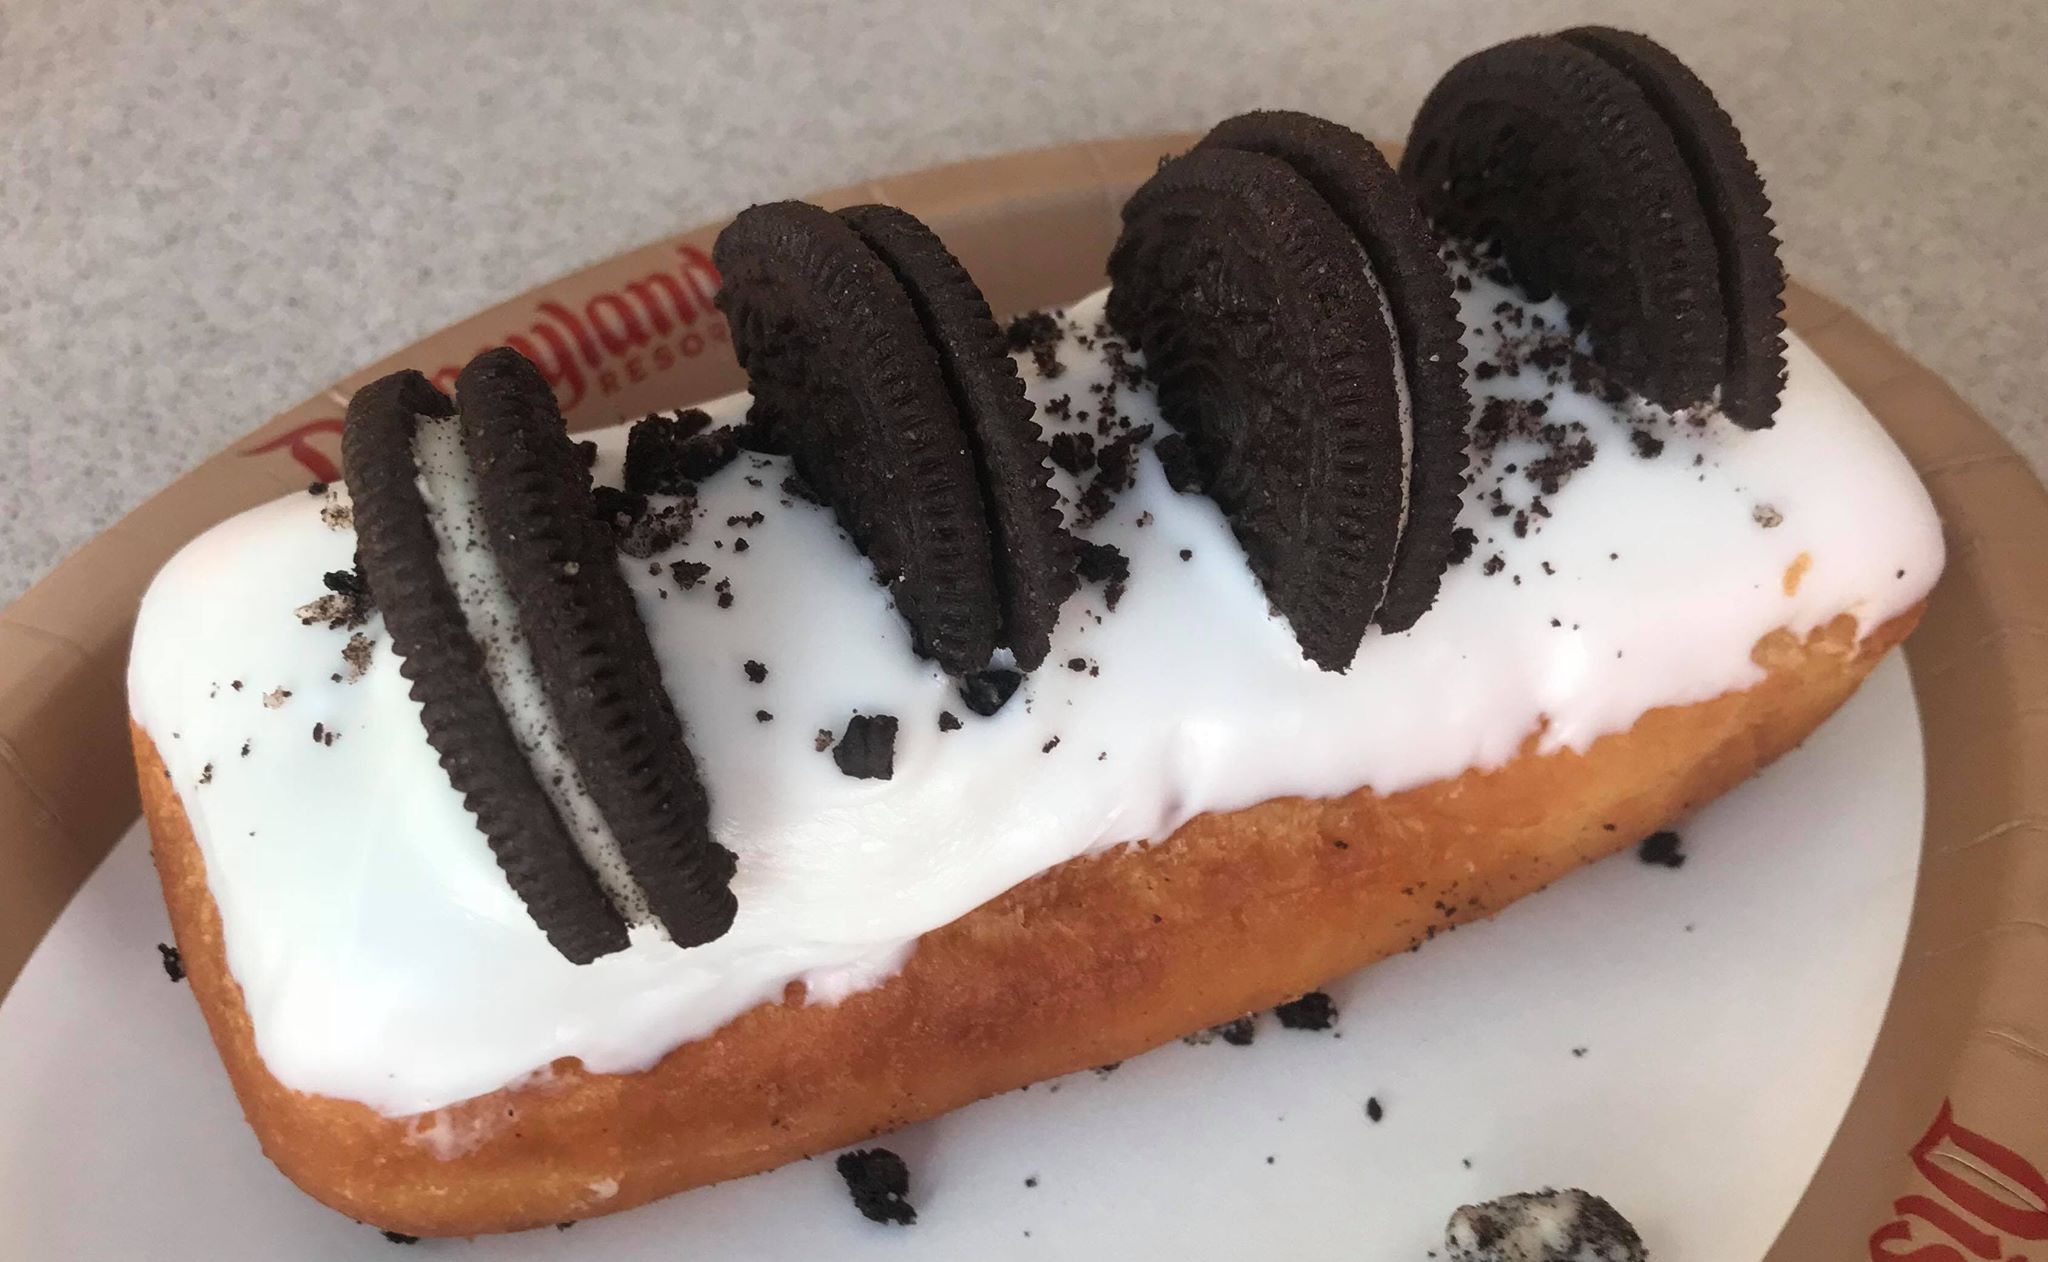 Disneyland Combines Our Love of Donuts and Cookies Into One Delicious Treat